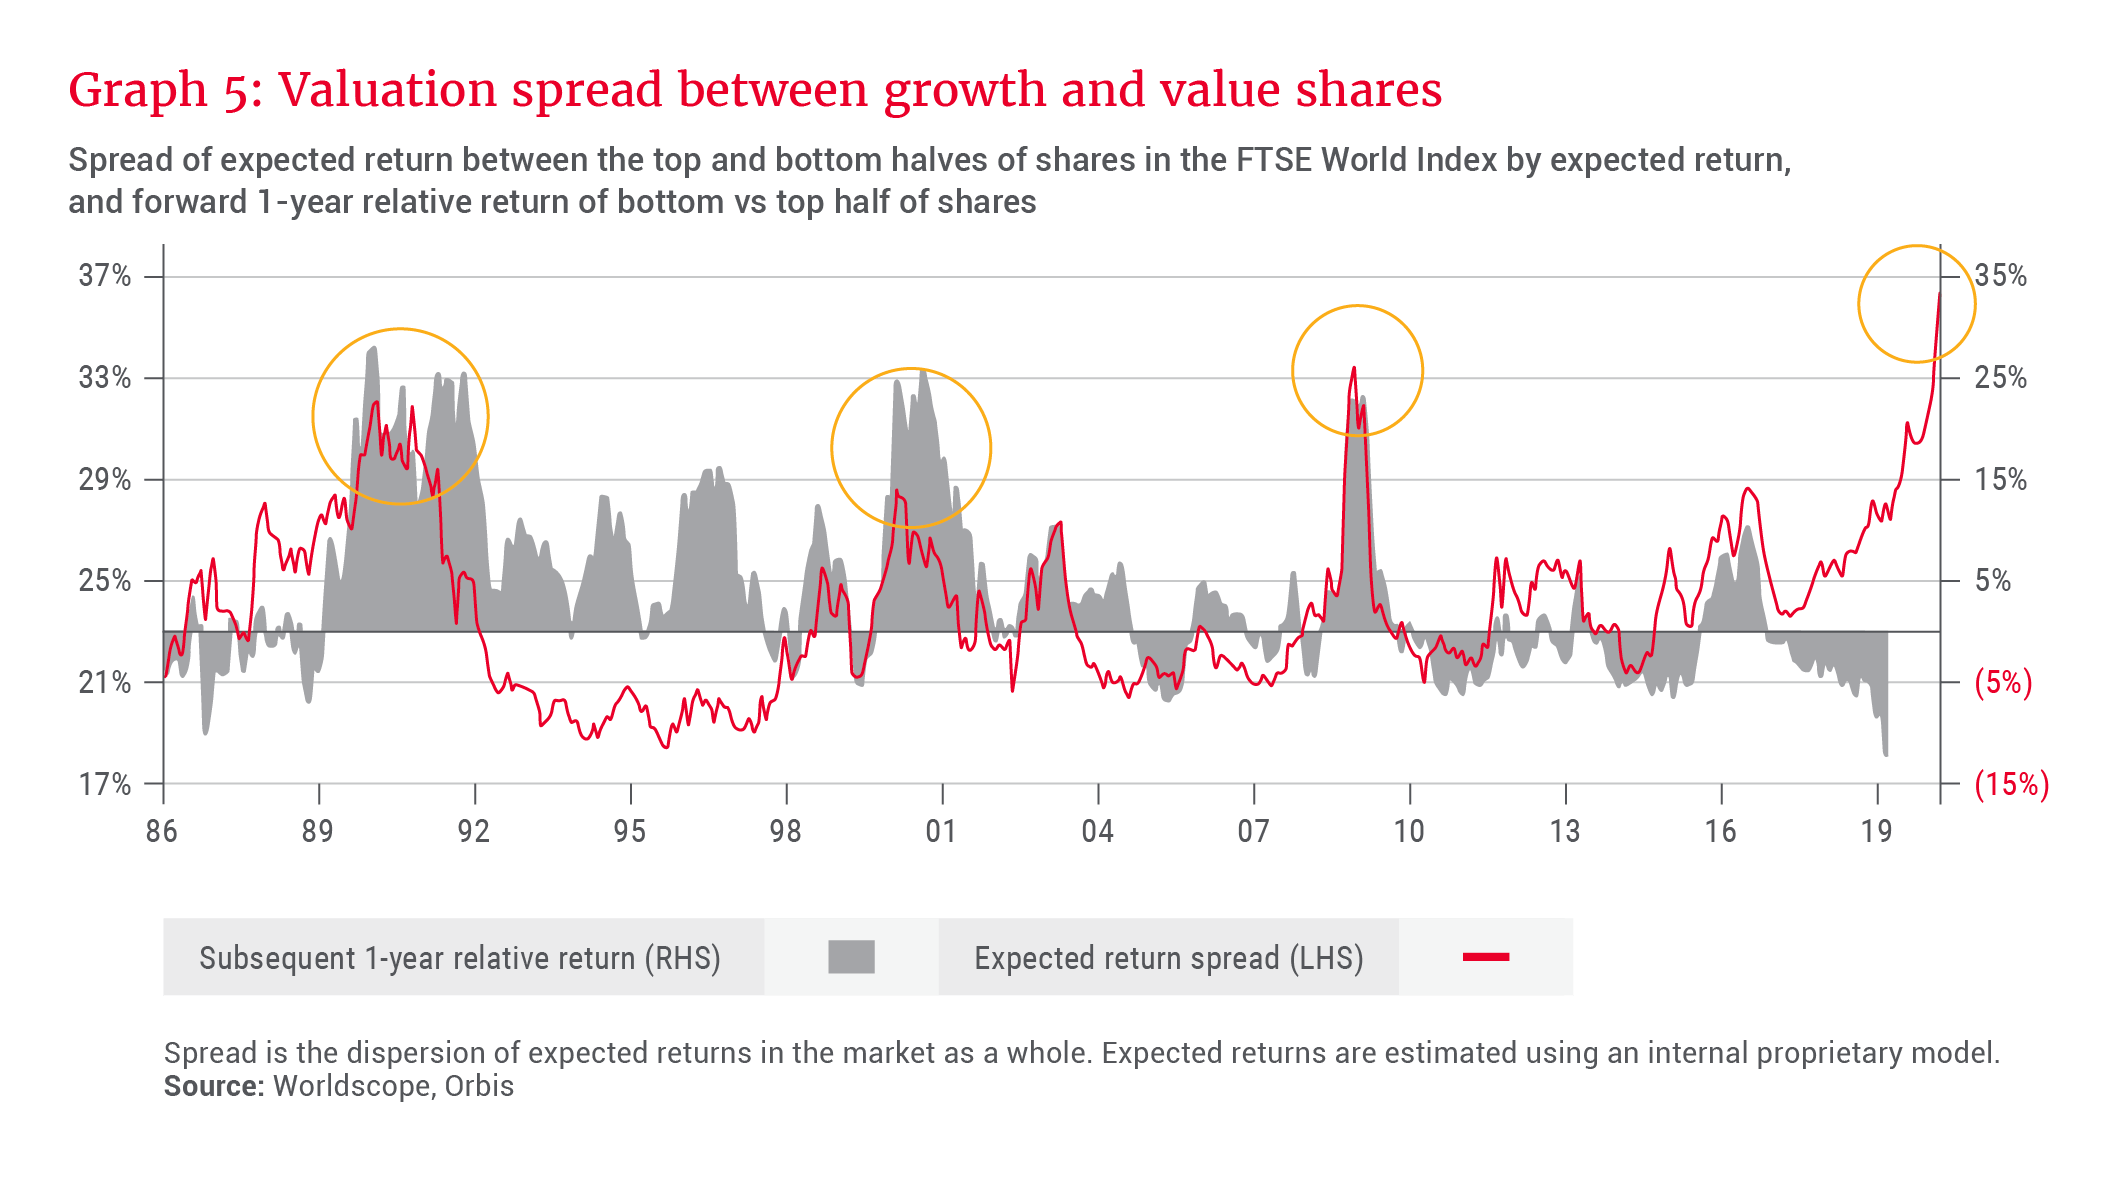 Valuation spread between growth and value shares - Allan Gray